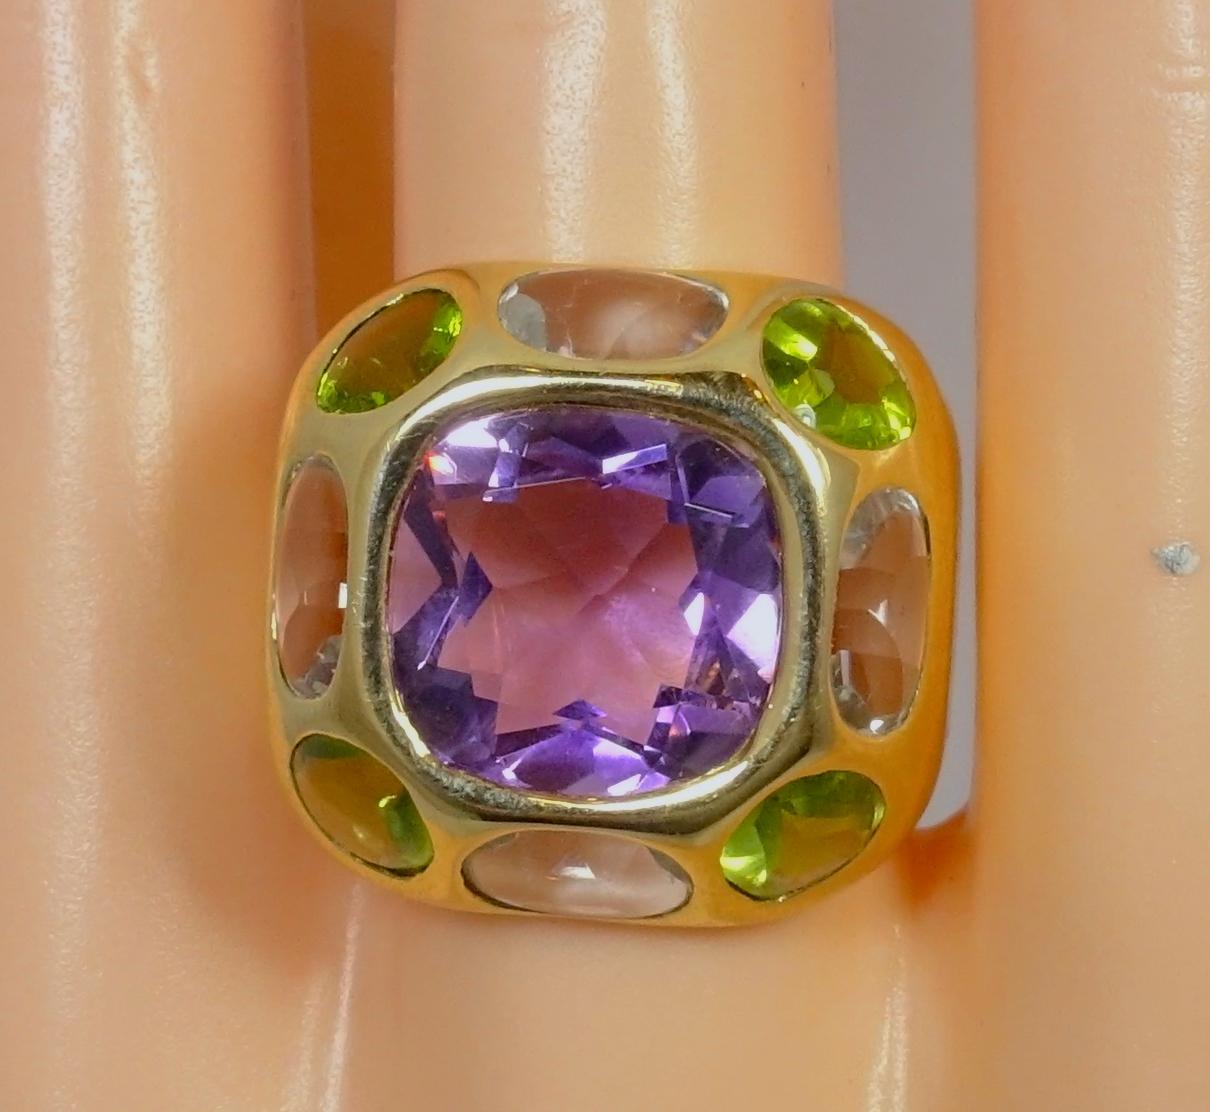 I don’t often come across a great gold Chanel ring like this.  This vintage signed Chanel ring is designed with a large center Amethyst accented by Peridots and Aquamarines gemstones around the amethyst. It’s in an 18kt gold setting.  This ring is a